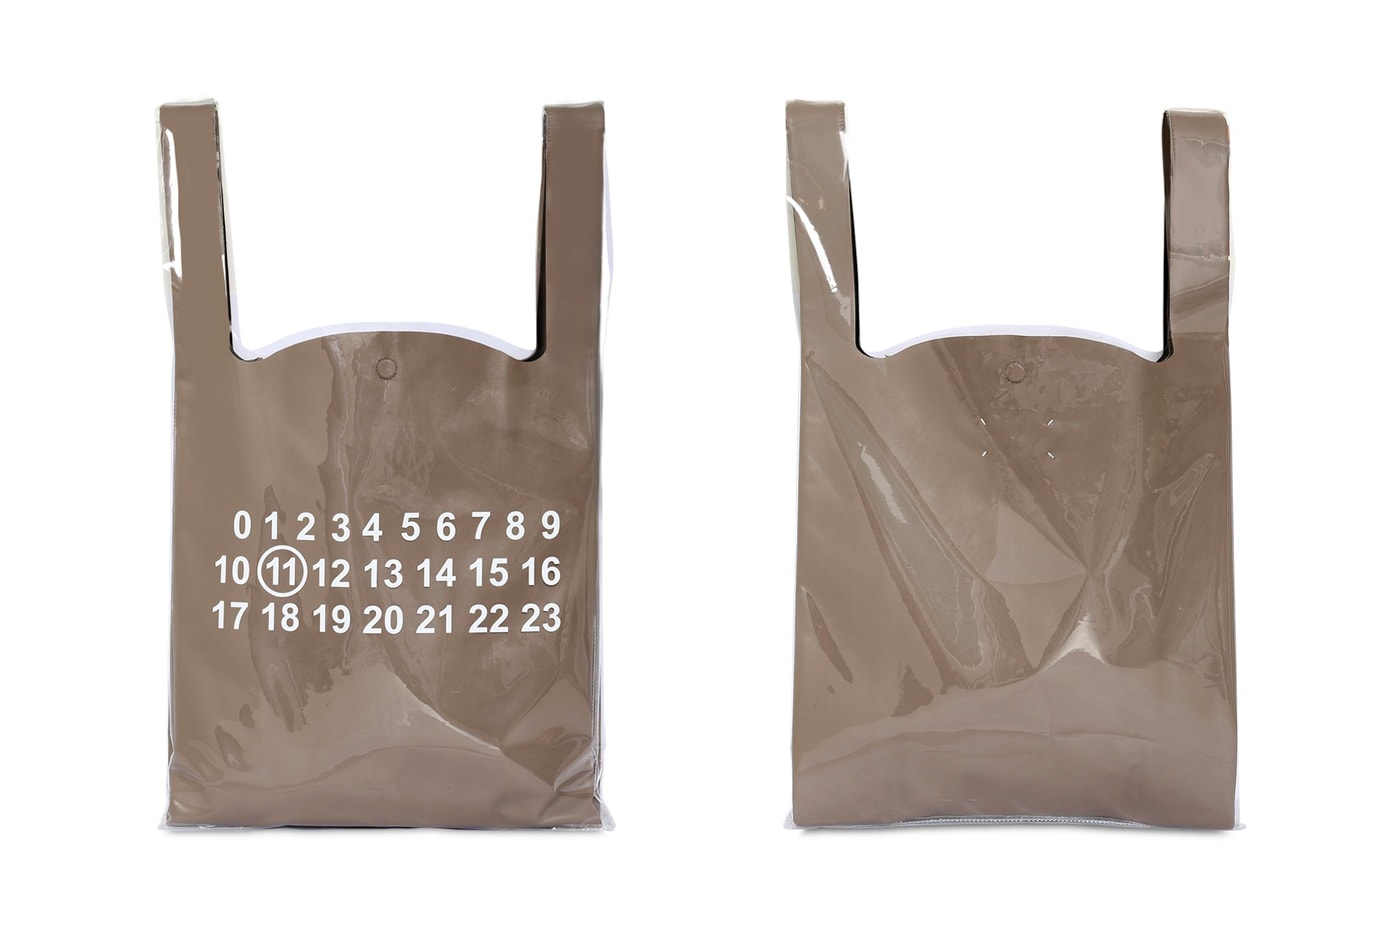 Maison Margiela Fall Winter 2018 PVC Tote Bags leather black white brown release info accessories